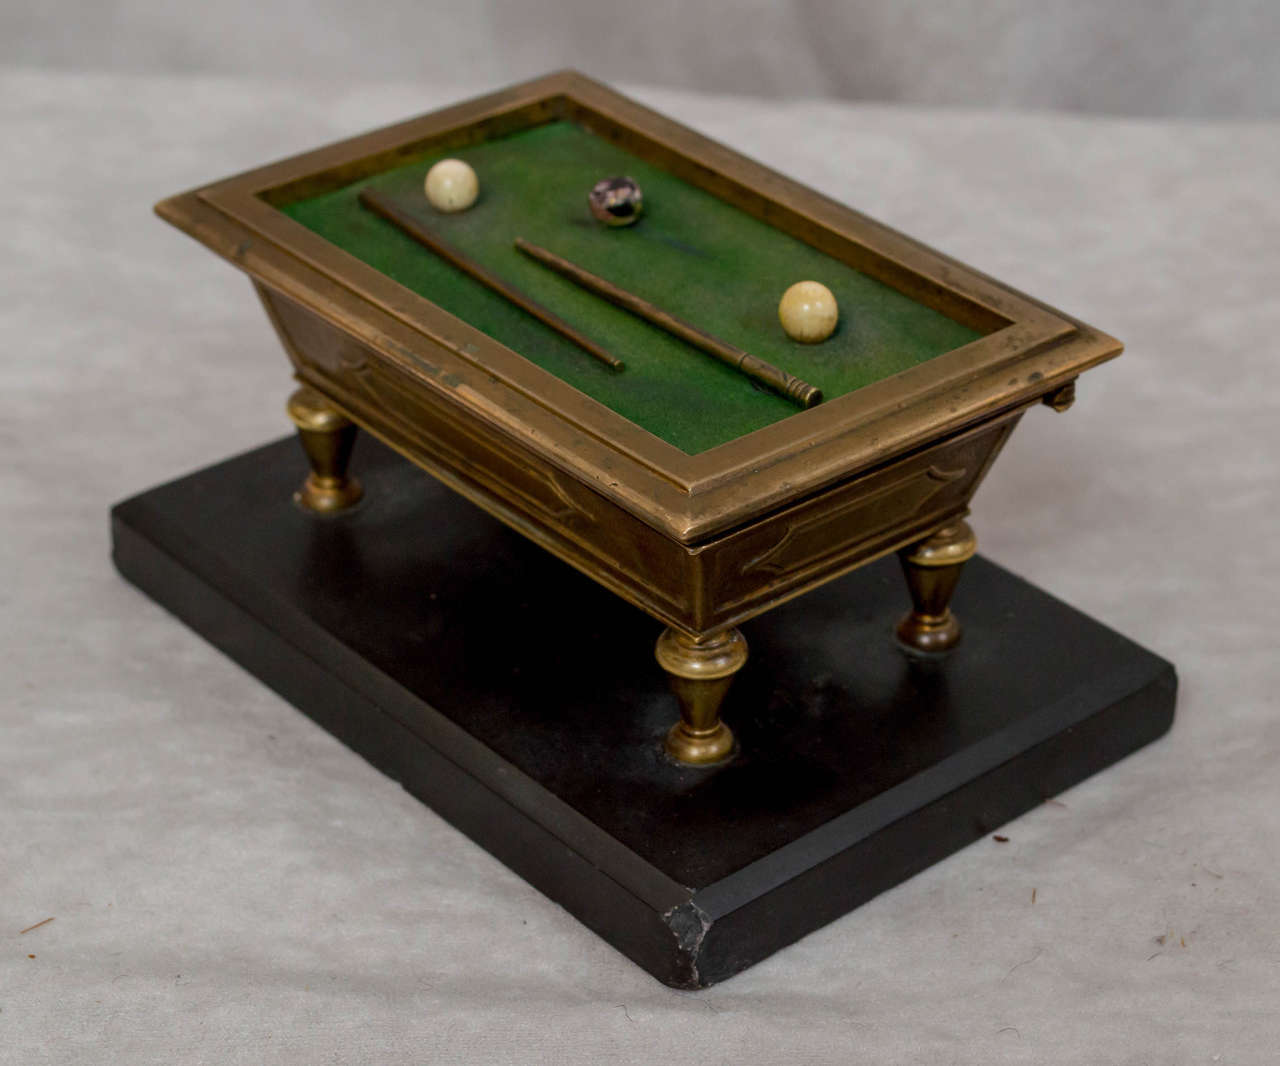 We love getting the unusual items,particularly when they are in bronze. The unique box is a great representation of an old billiard table. This is before pocket billiards was invented. Just 3 balls,and no pockets. Each player was assigned a ball.